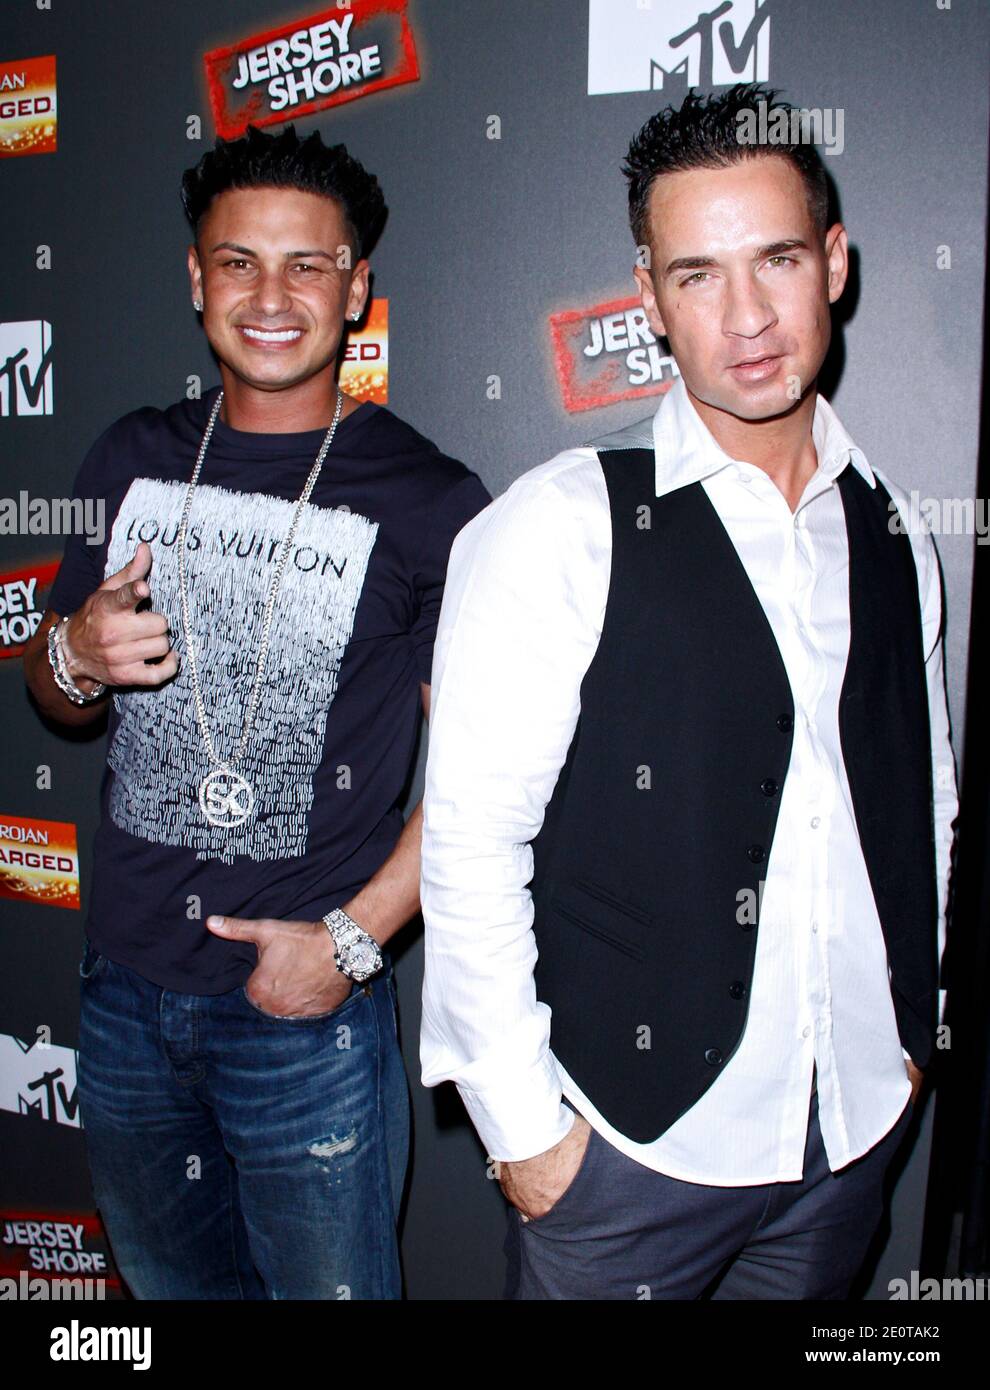 Paul 'Pauly Dee' DelVecchio and Mike 'The Situation' Sorrentino attend the Jersey Shore final season premiere event at Bagatelle in New York City, NY, USA, on October 04, 2012. Photo by Donna Ward/ABACAPRESS.COM Stock Photo